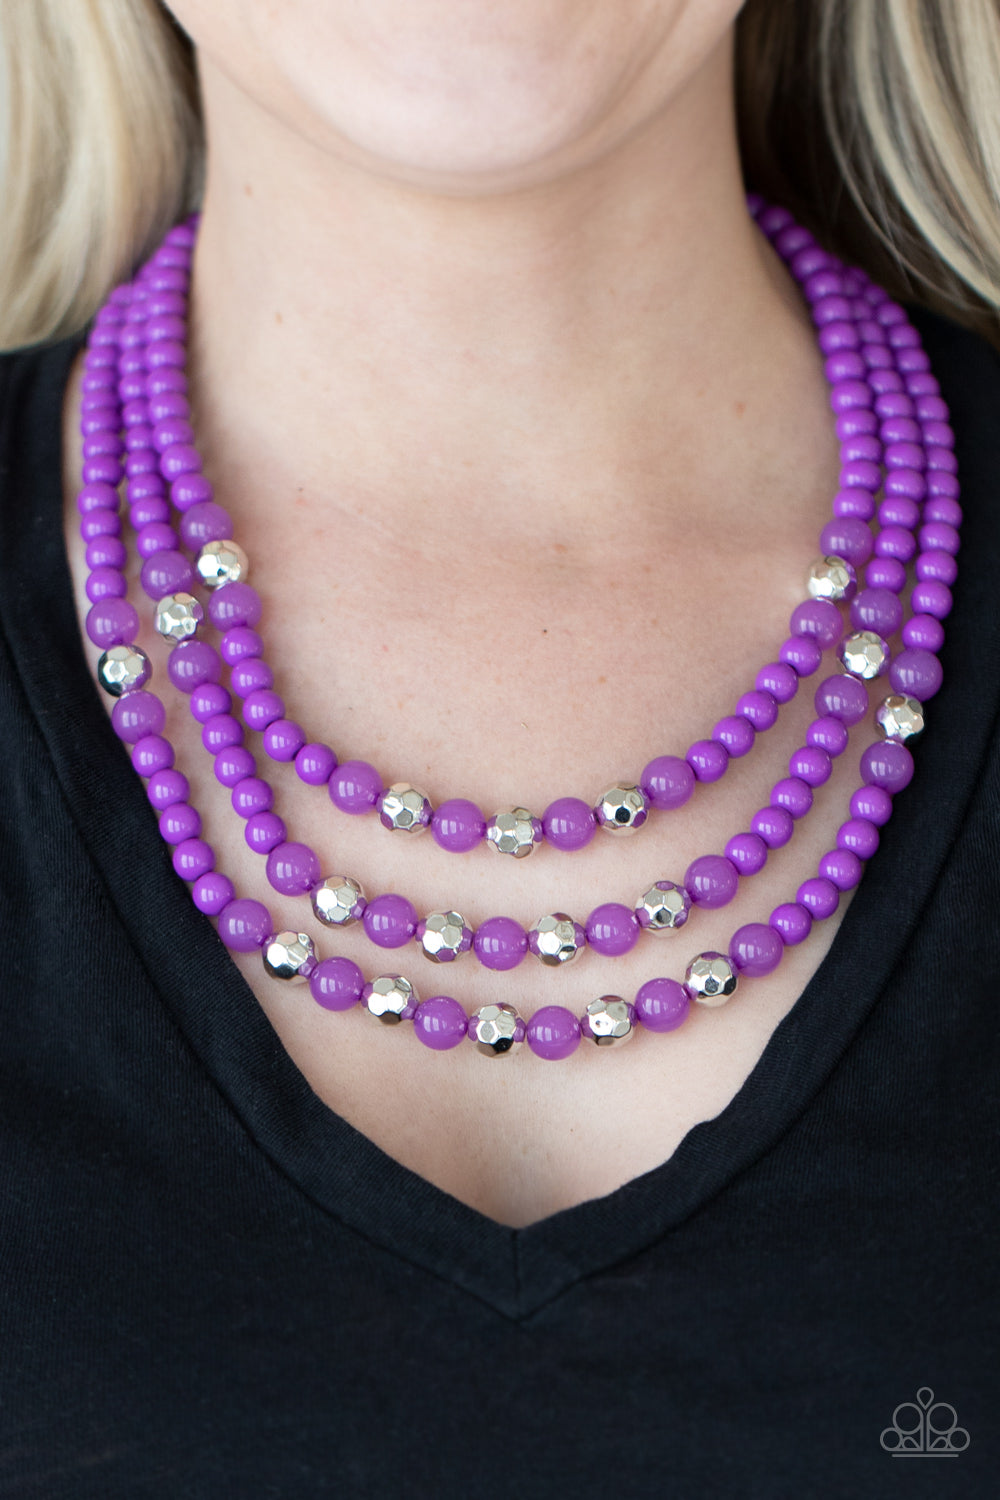 STAYCATION All I Ever Wanted - purple - Paparazzi necklace